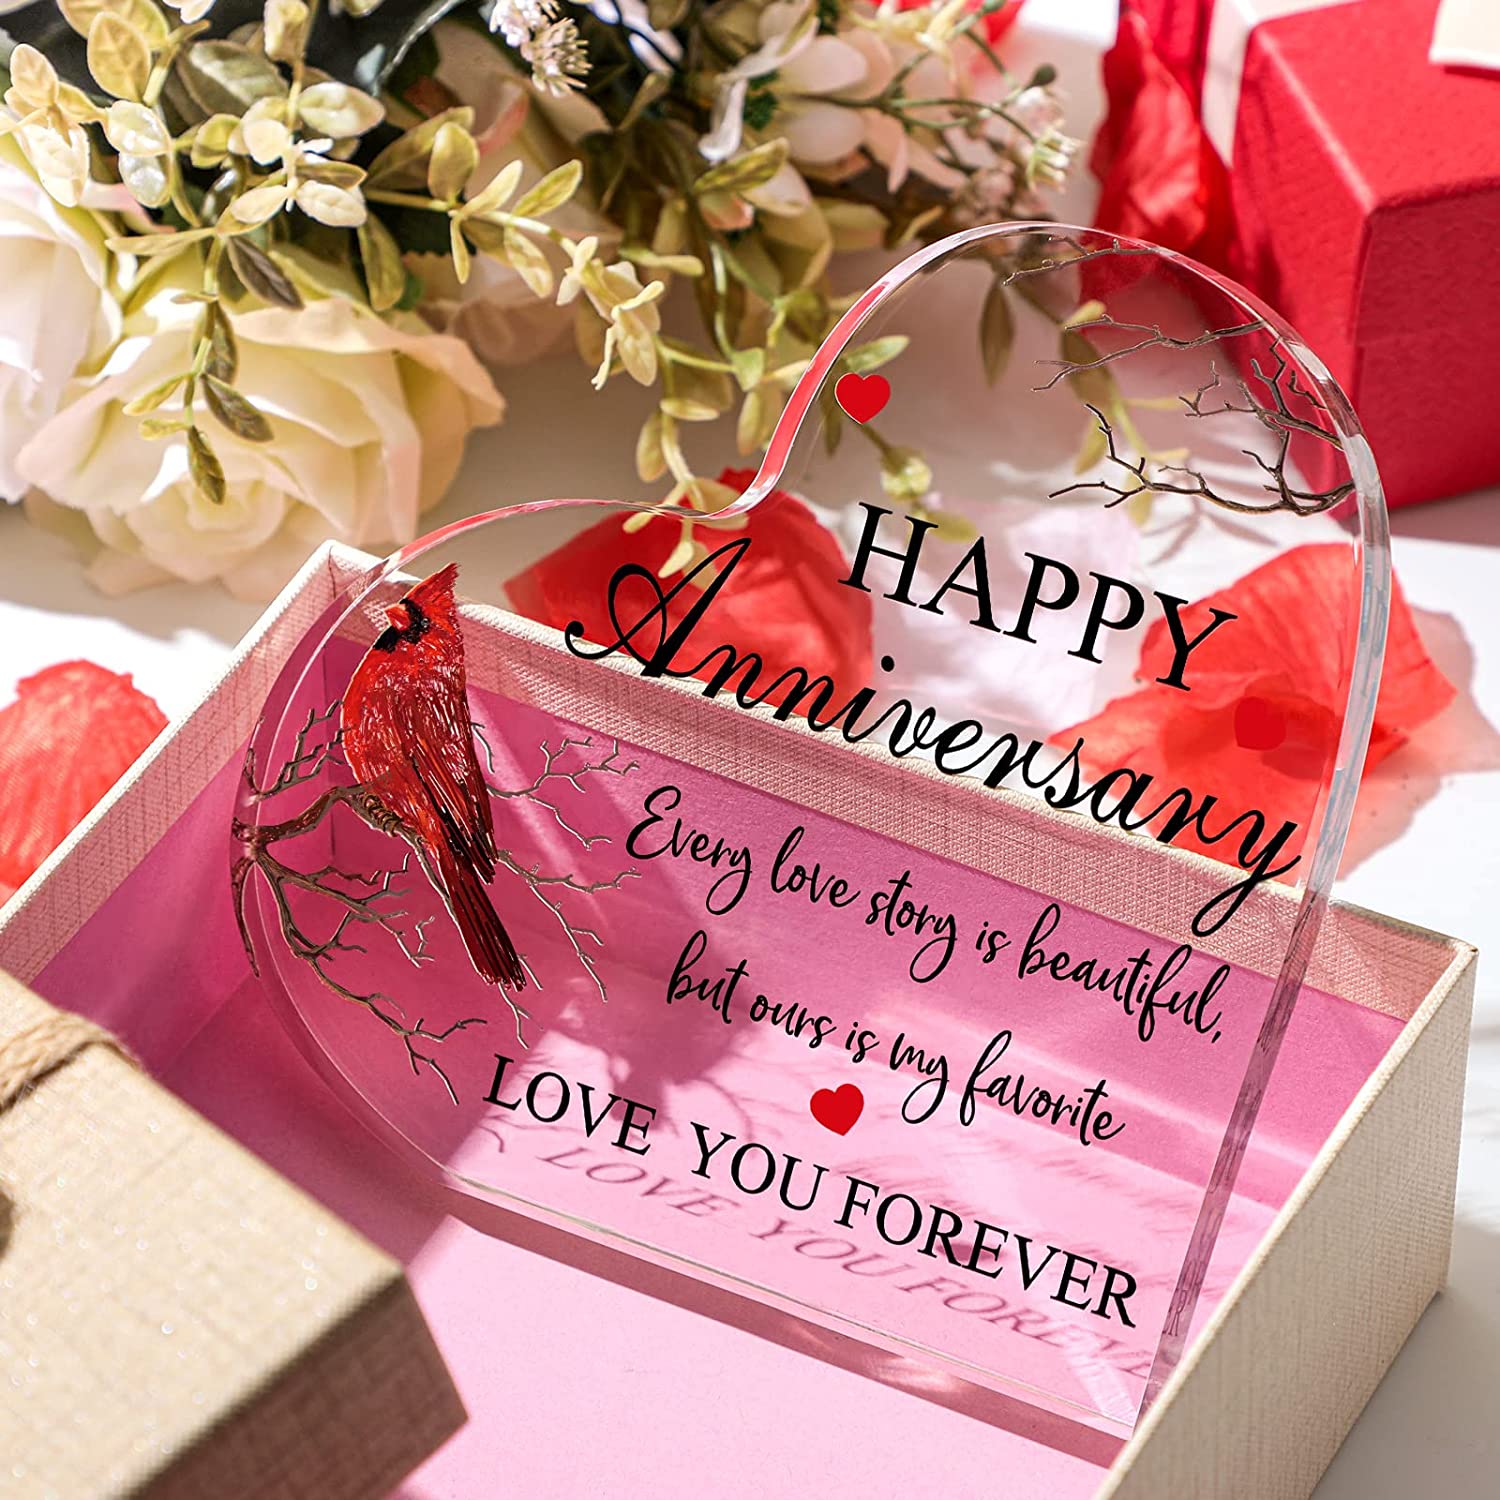 Gifts for Wife - Gifts for Her - Happy Anniversary Wedding Gifts